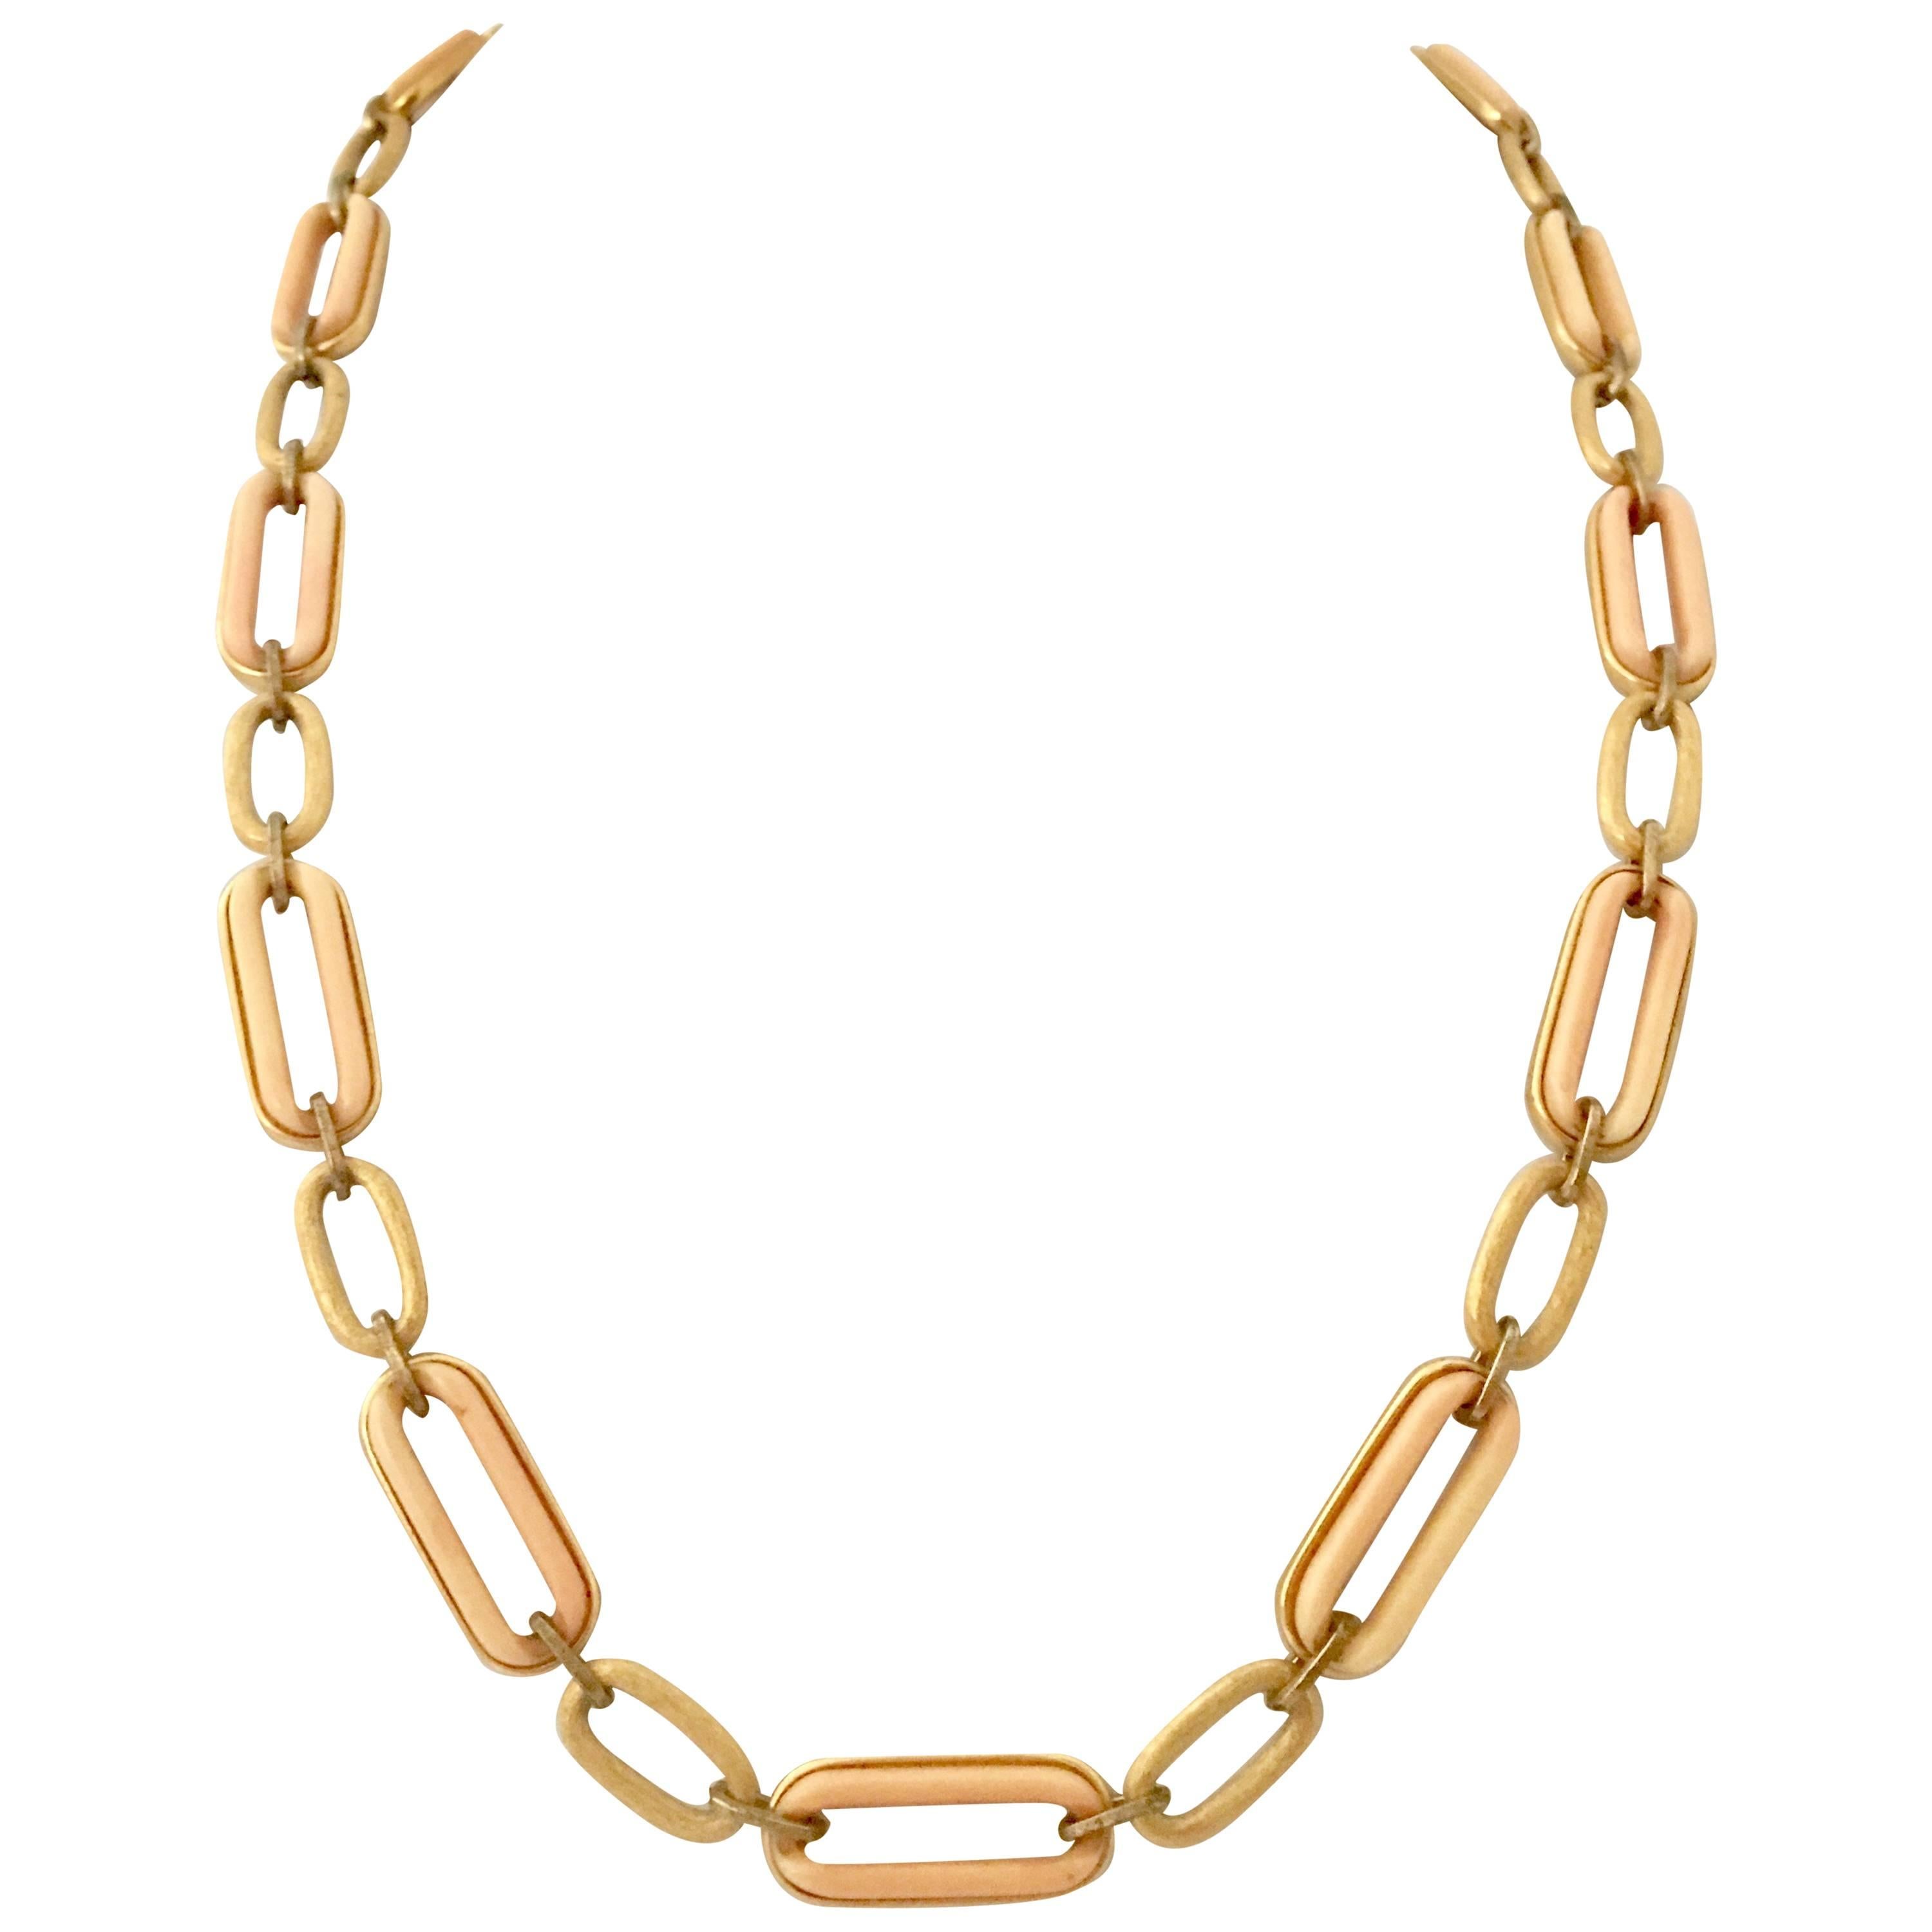 Givenchy Lucite & Brushed Gold Chain Link Opera Necklace